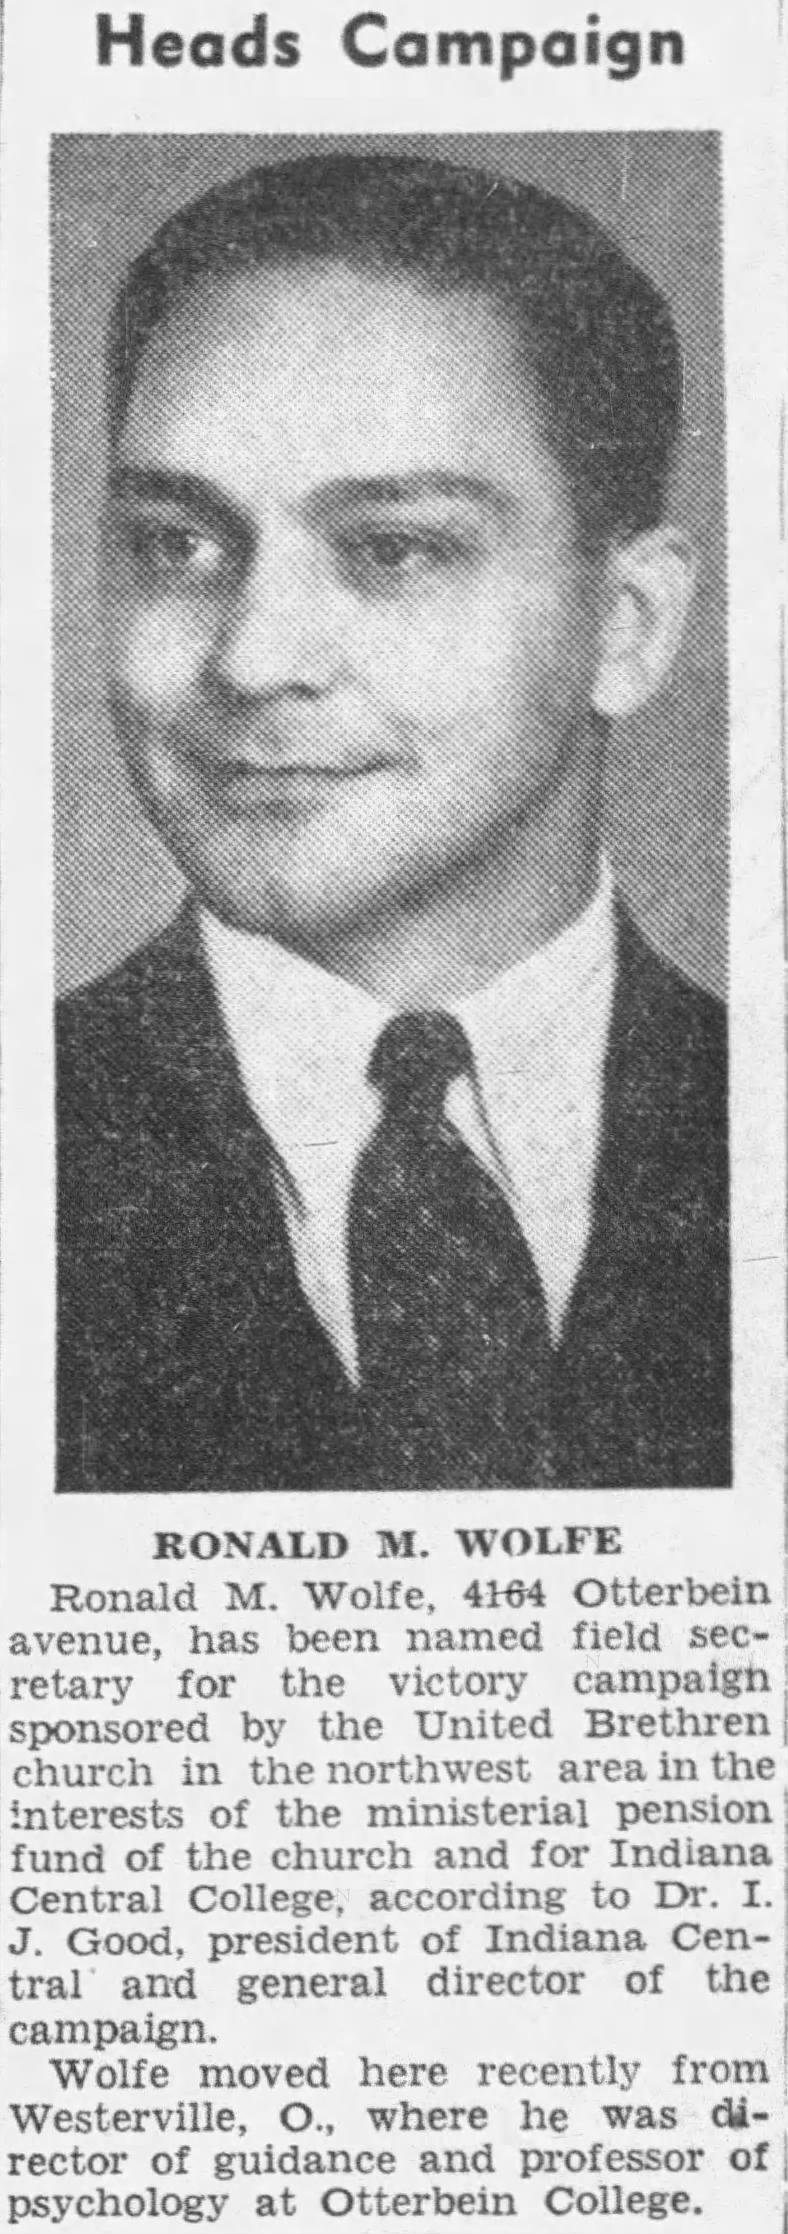 1941 Ranald M. Wolfe was the field secretary for a campaign by the United Brethren church.